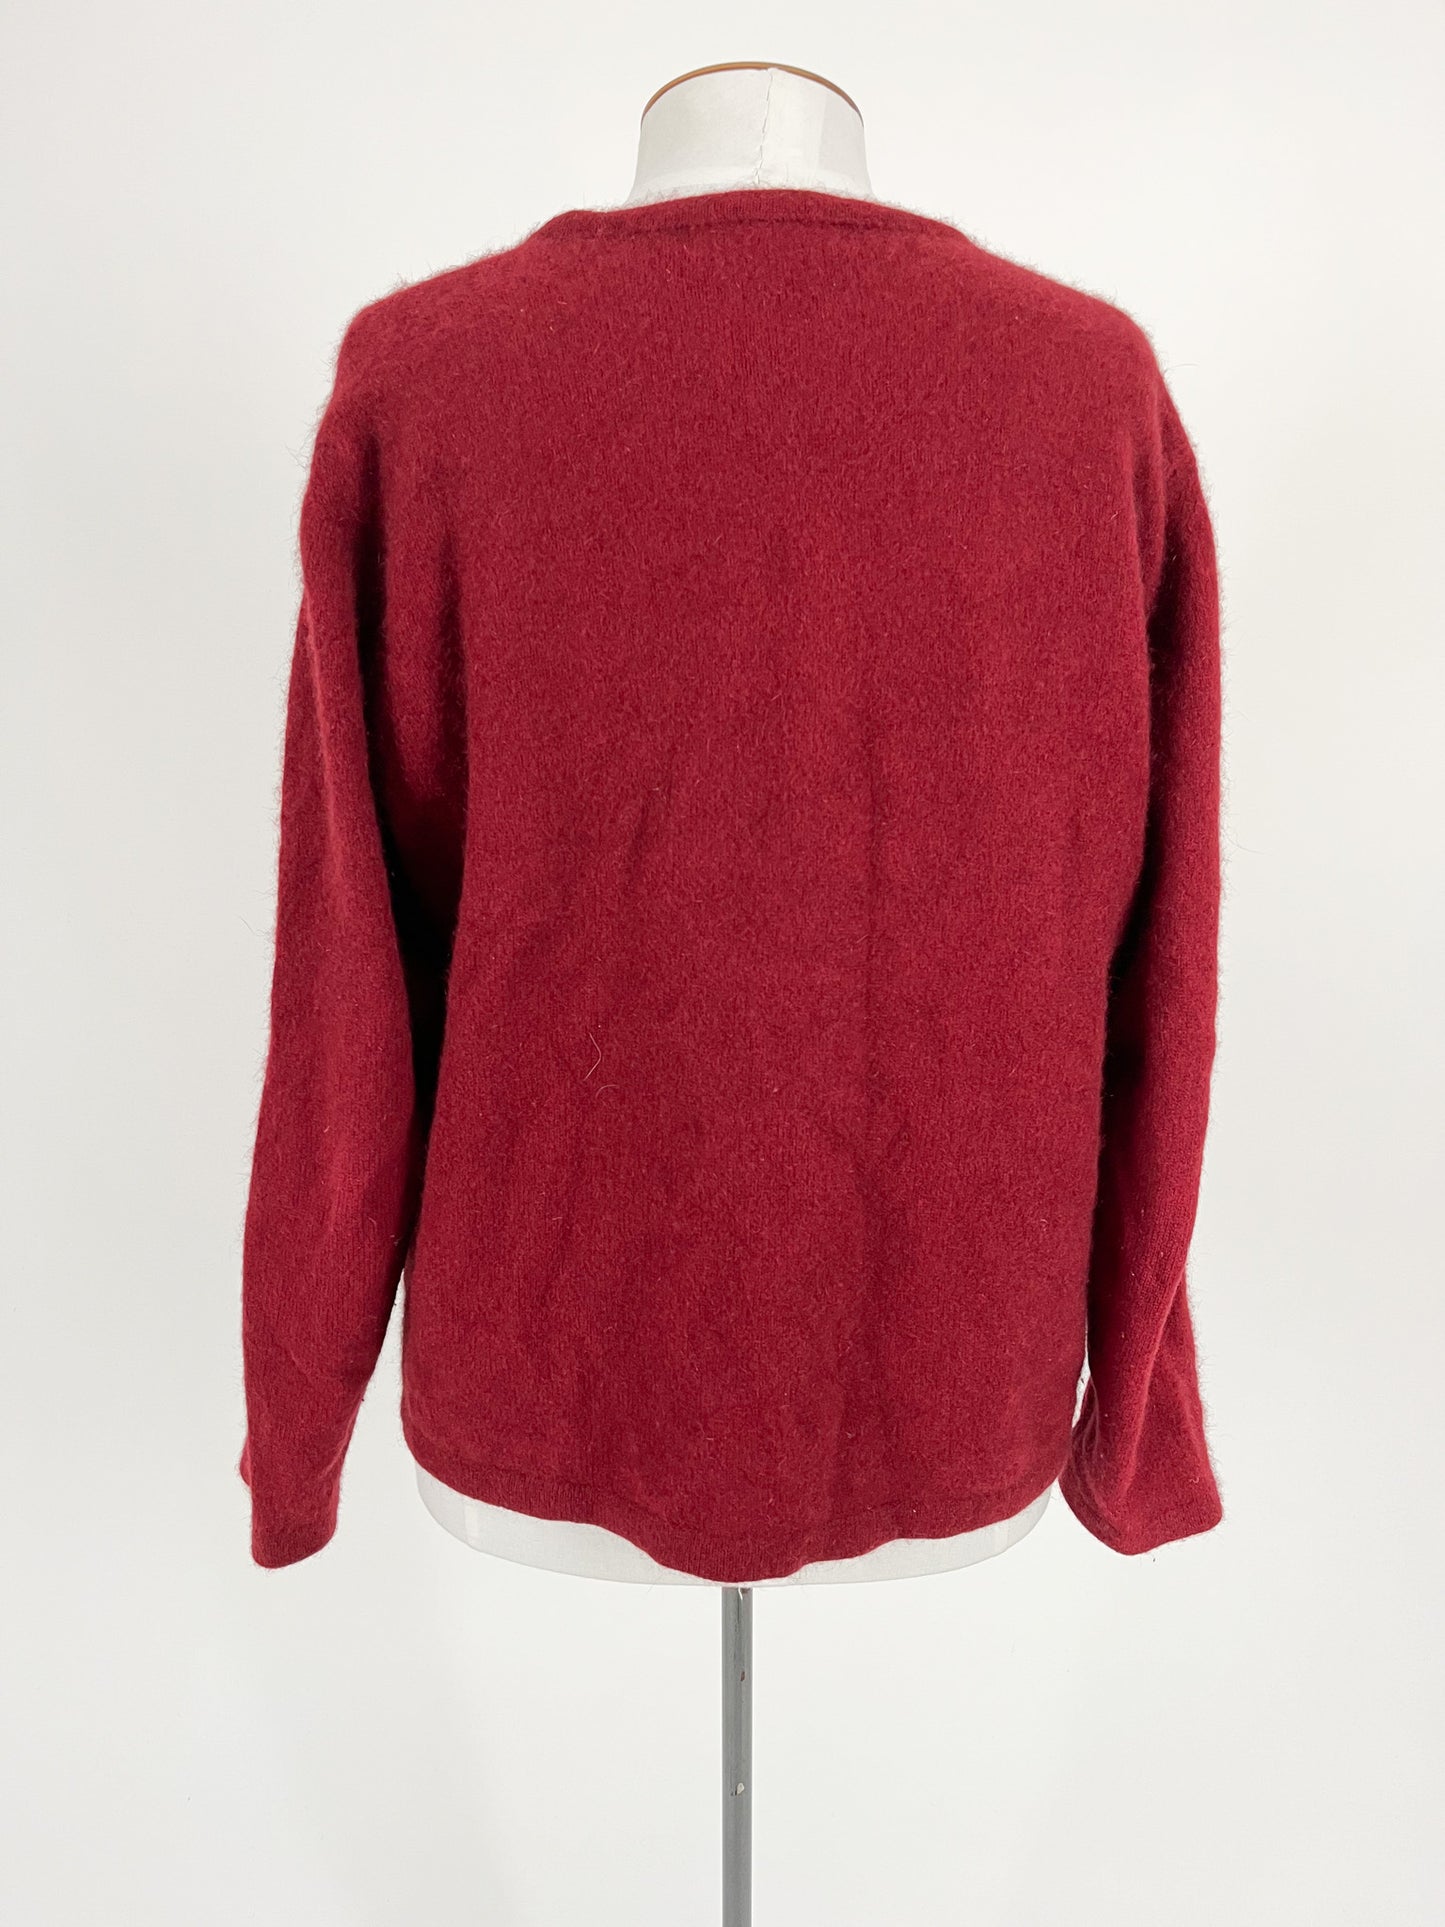 Native World | Red Casual Jumper | Size XL